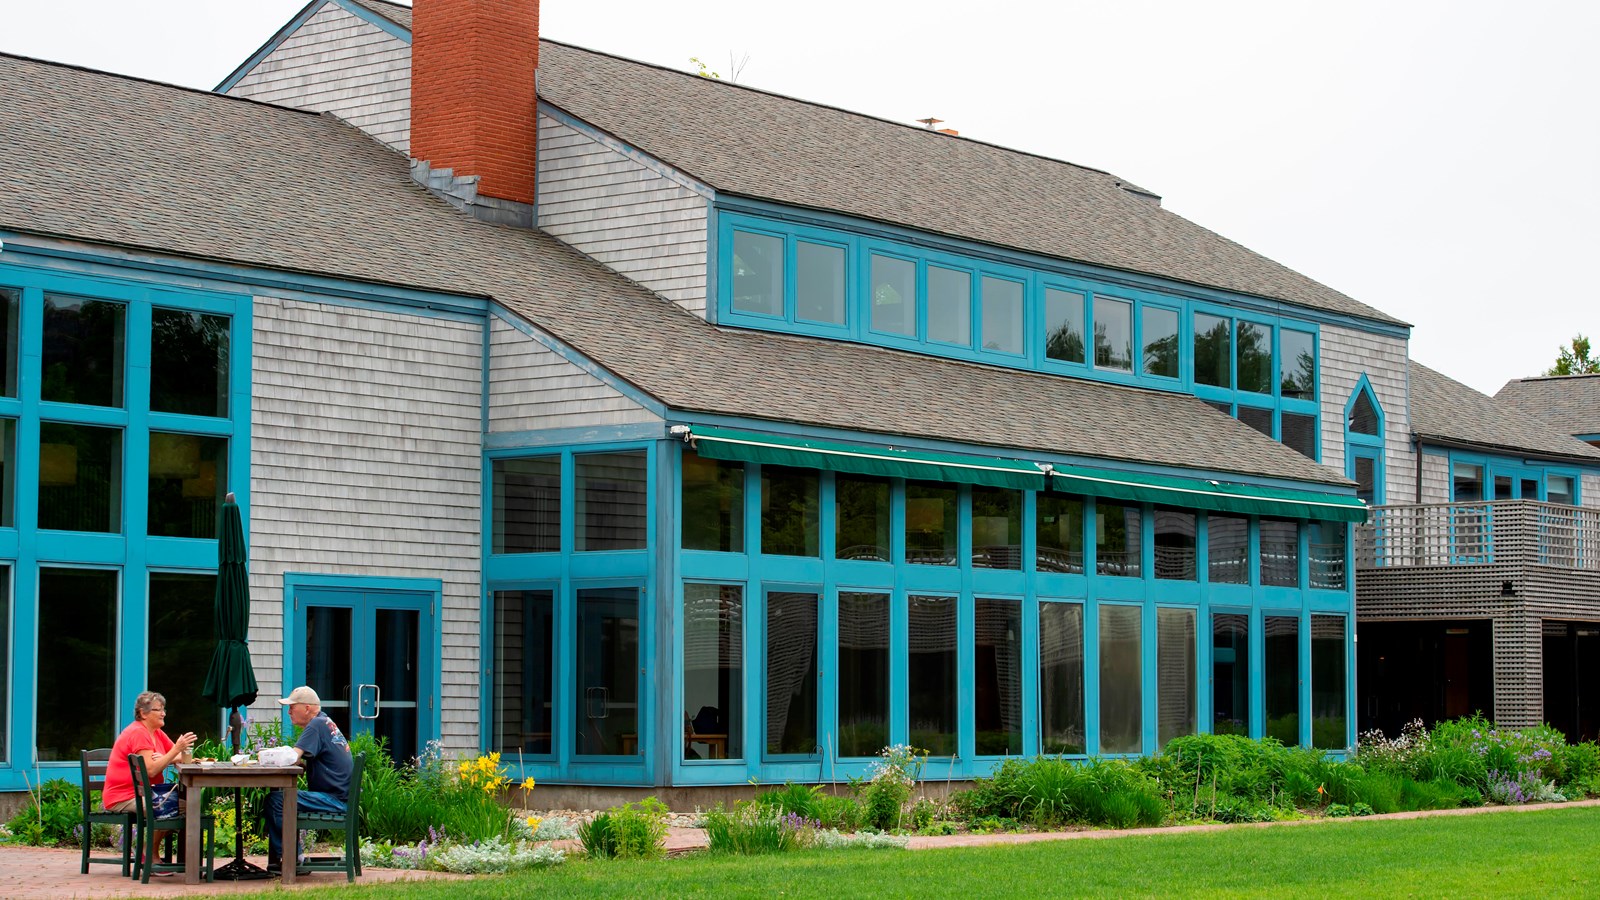 A two story grey building lined with windows and blue trim in front of a green lawn